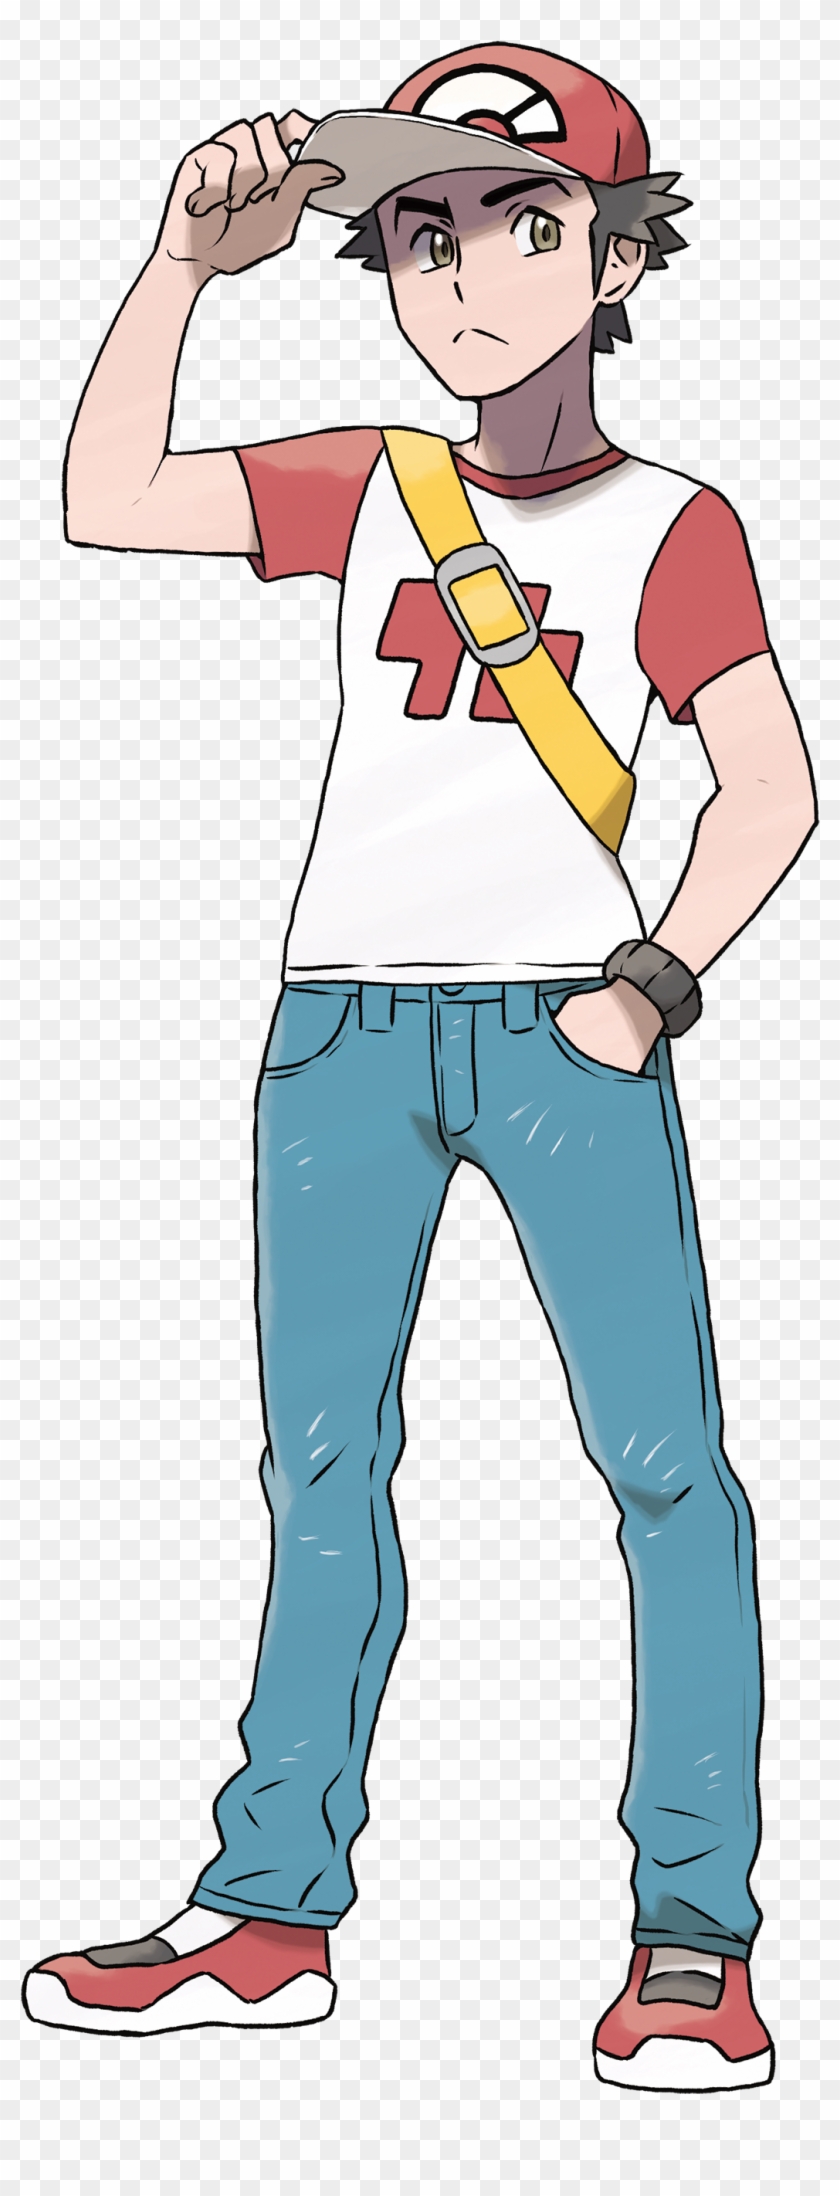 Pokémon Sun And Moon Pokémon Red And Blue Pokémon Gold - Red Pokemon Sun  And Moon - Free Transparent PNG Clipart Images Download